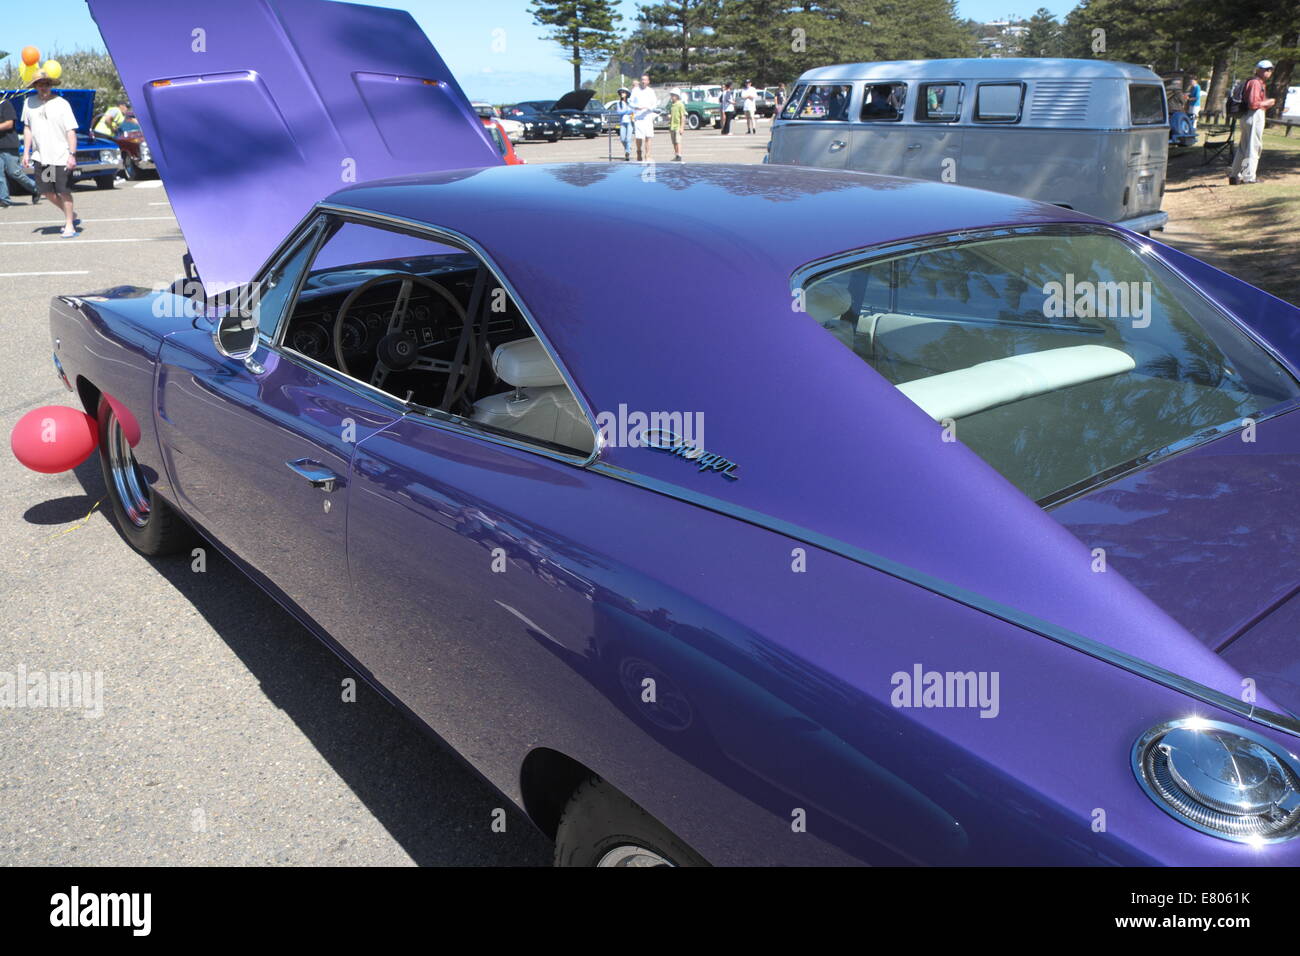 Newport Beach, Sydney, Australia. 27th Sep, 2014. Classic cars on display at Sydney's Newport Beach. Here a Dodge Charger 1960's. Credit:  martin berry/Alamy Live News Stock Photo